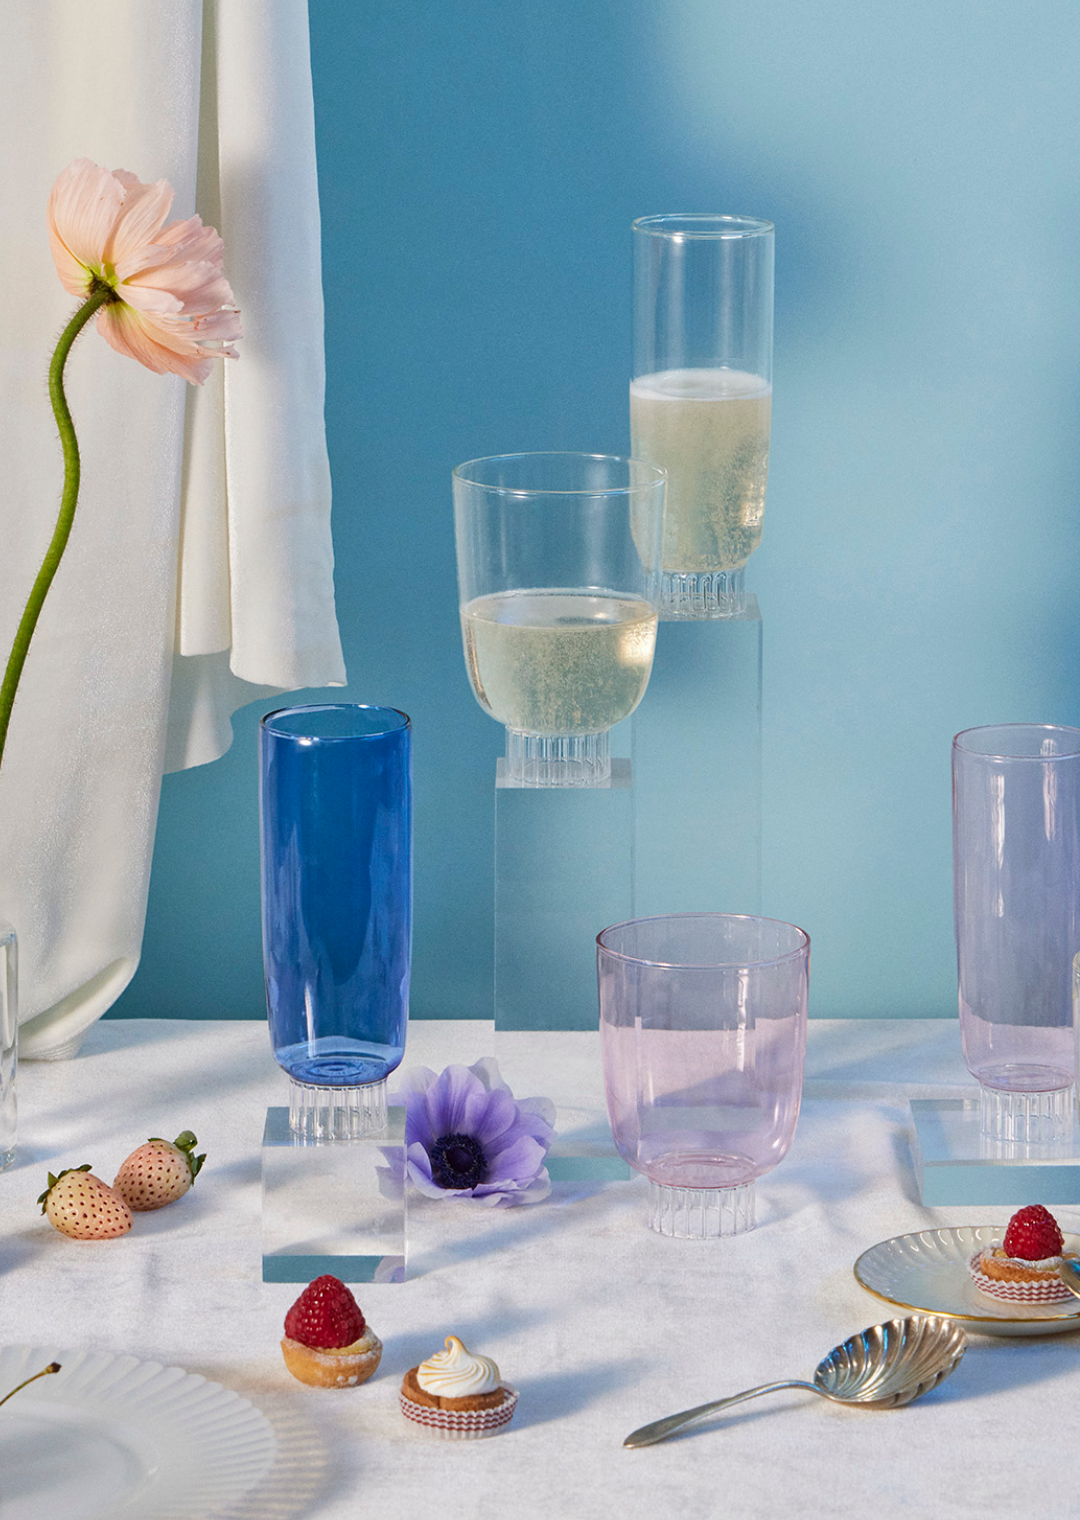 Sprezz Romantic Collection | Stemless Wine Glasses | Margherita Rui |Ichendorf Milano. Cobalt blue champagne flute, blush pink stemless wine glass, blush pink champagne flure, clear champagne glass on a table with flowers and petit fours.